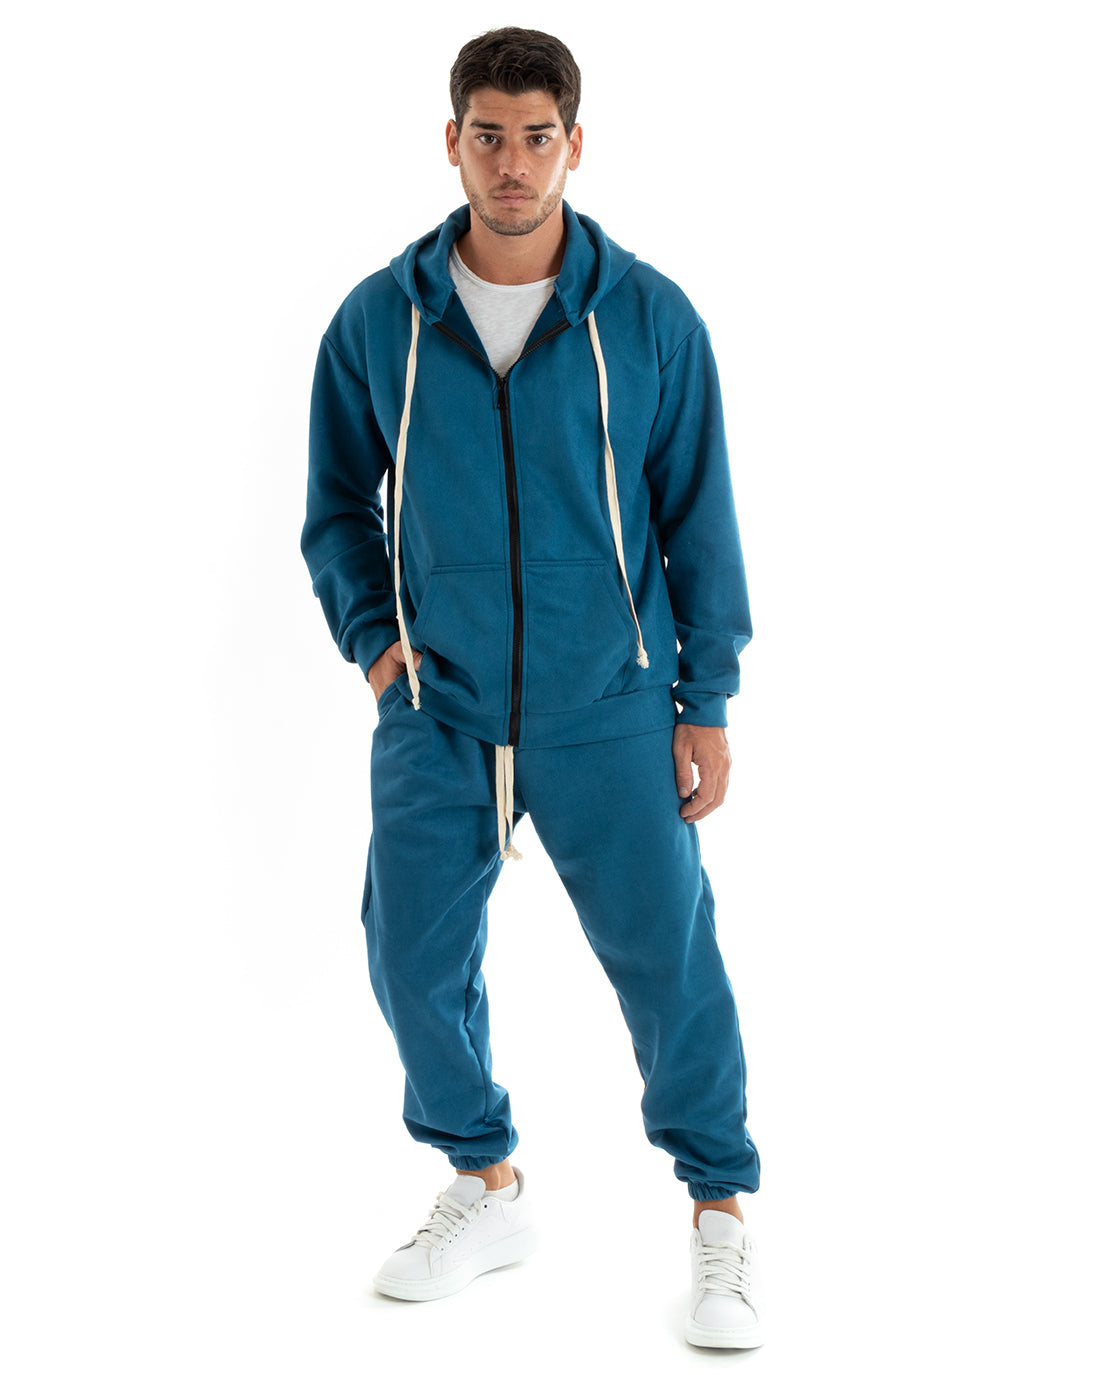 Men's Tracksuit Set, Hooded Sweatshirt and Zip Trousers with Drawstring Waist in Petrol Eco Suede GIOSAL-OU2400A